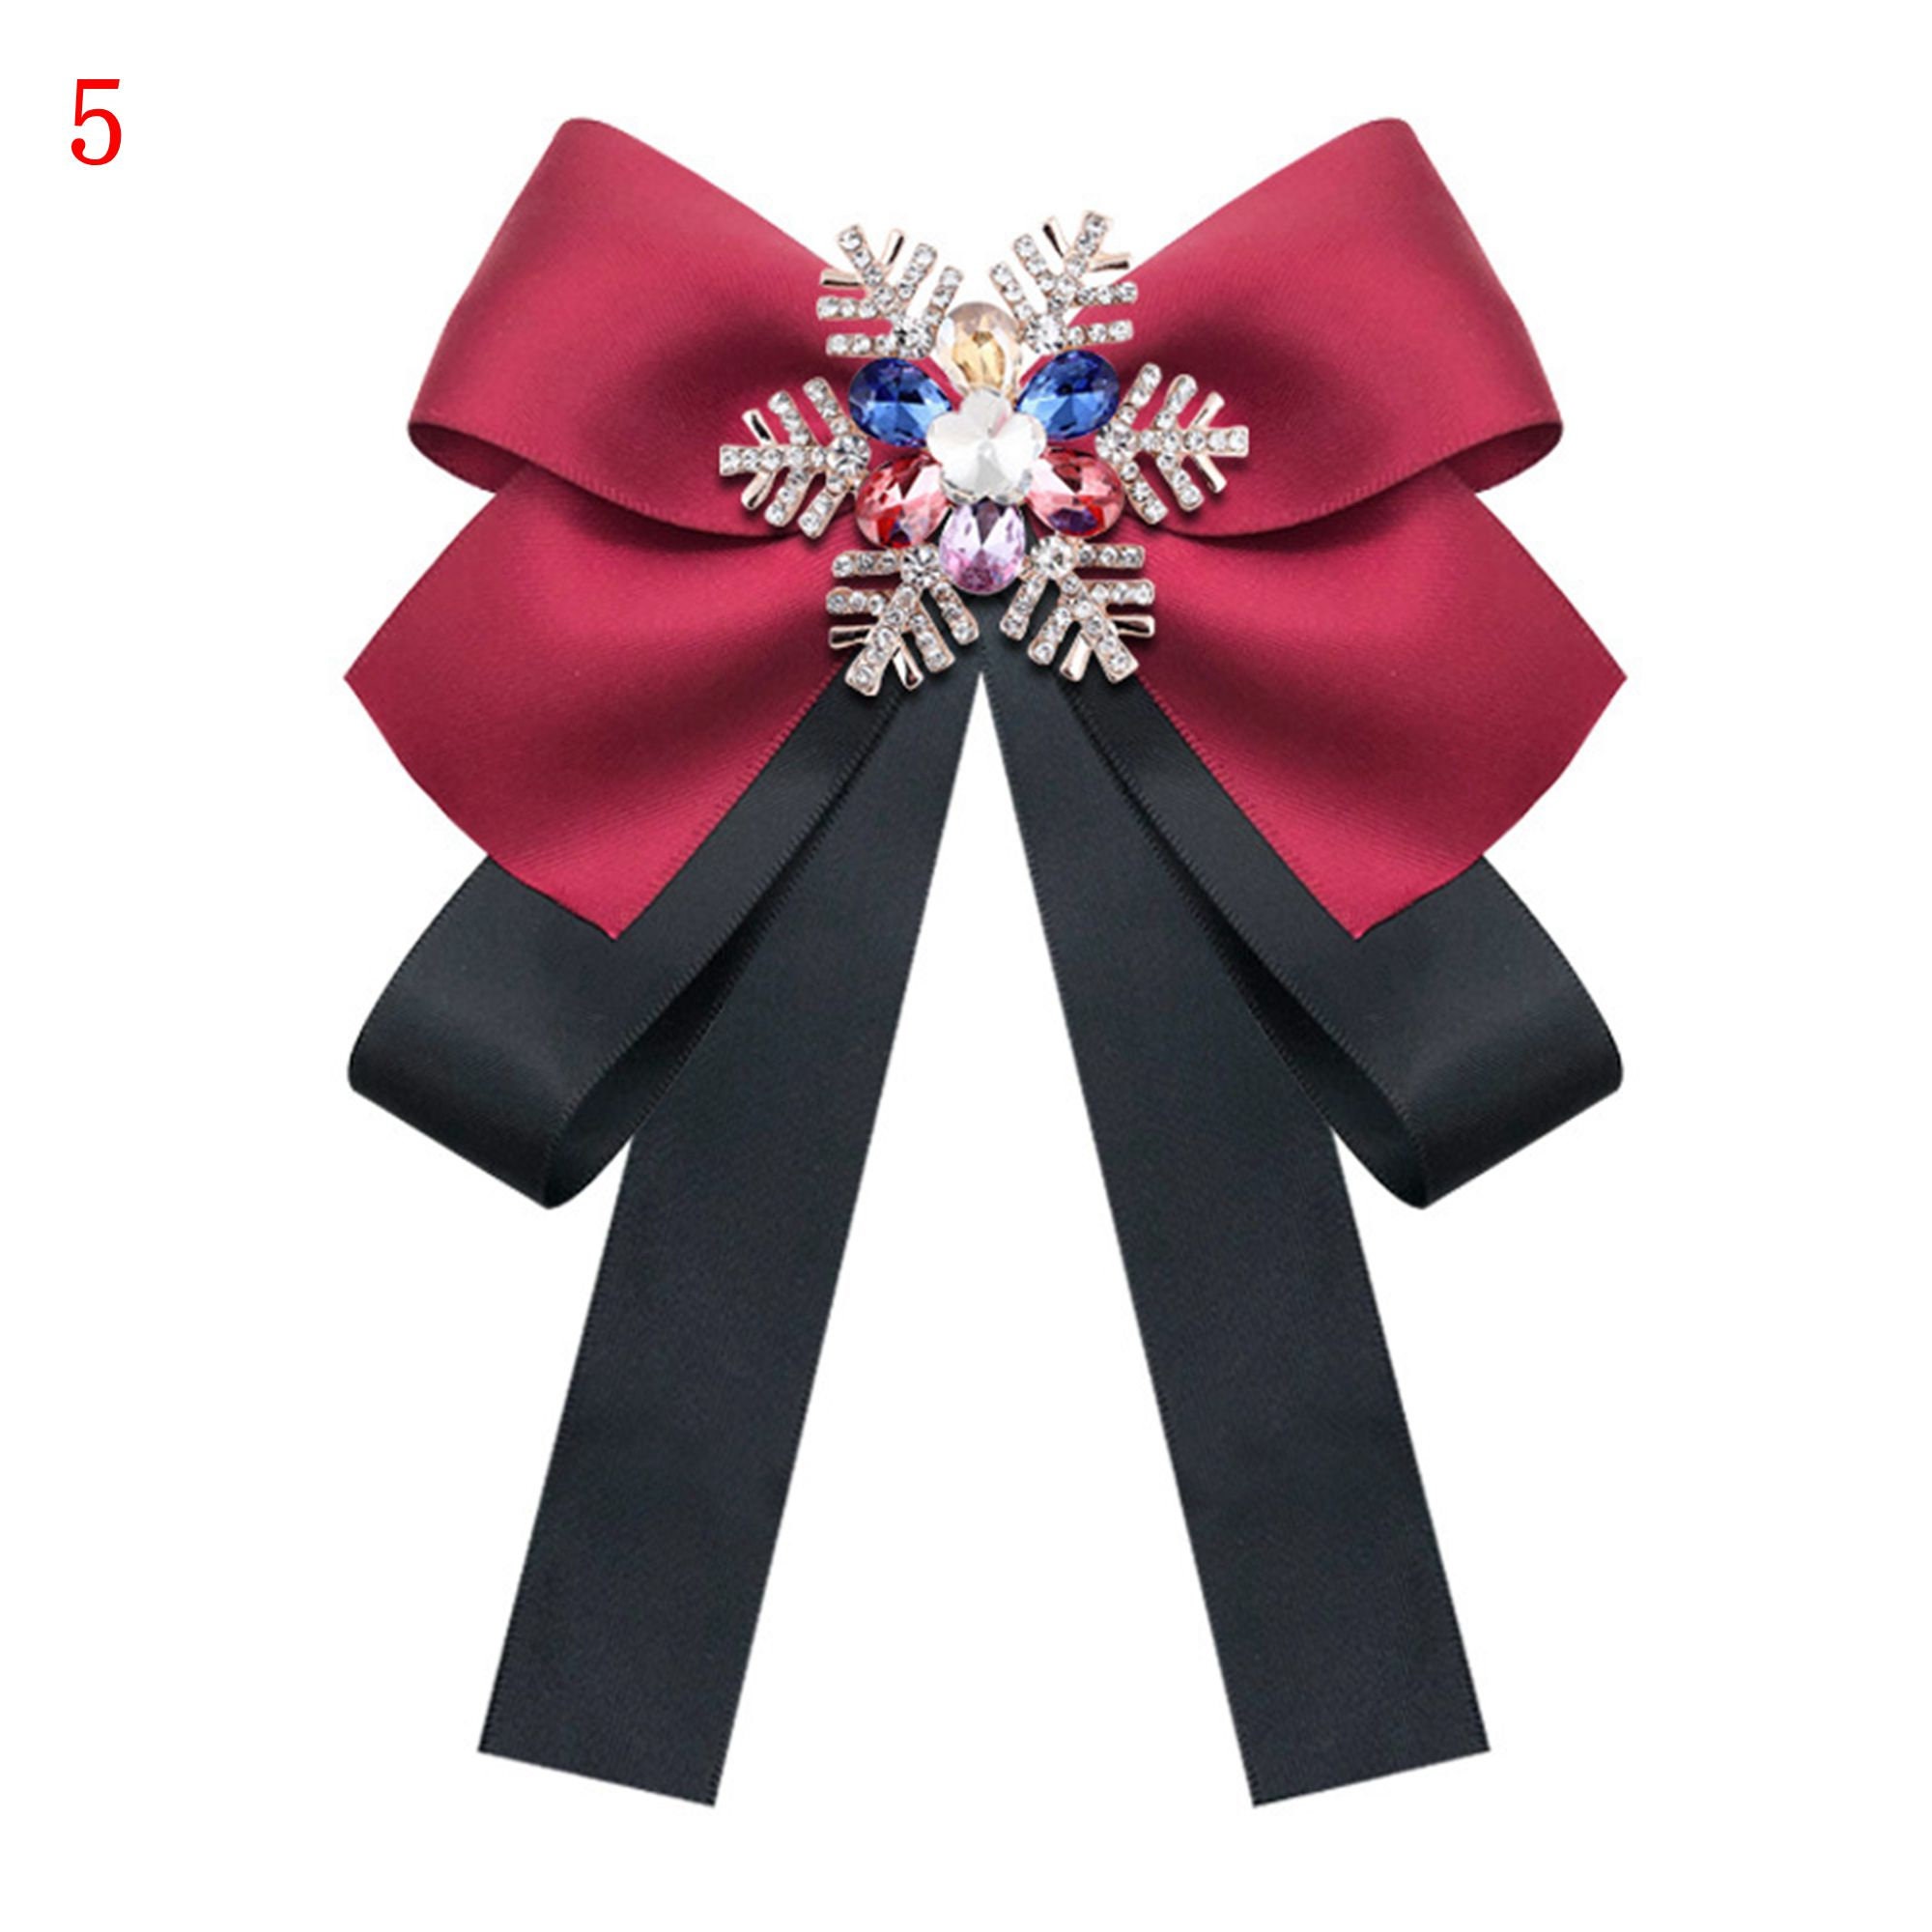 Snowflake Bow Tie Brooch Tie Pin Hand Made Ribbon Brooch With - Etsy